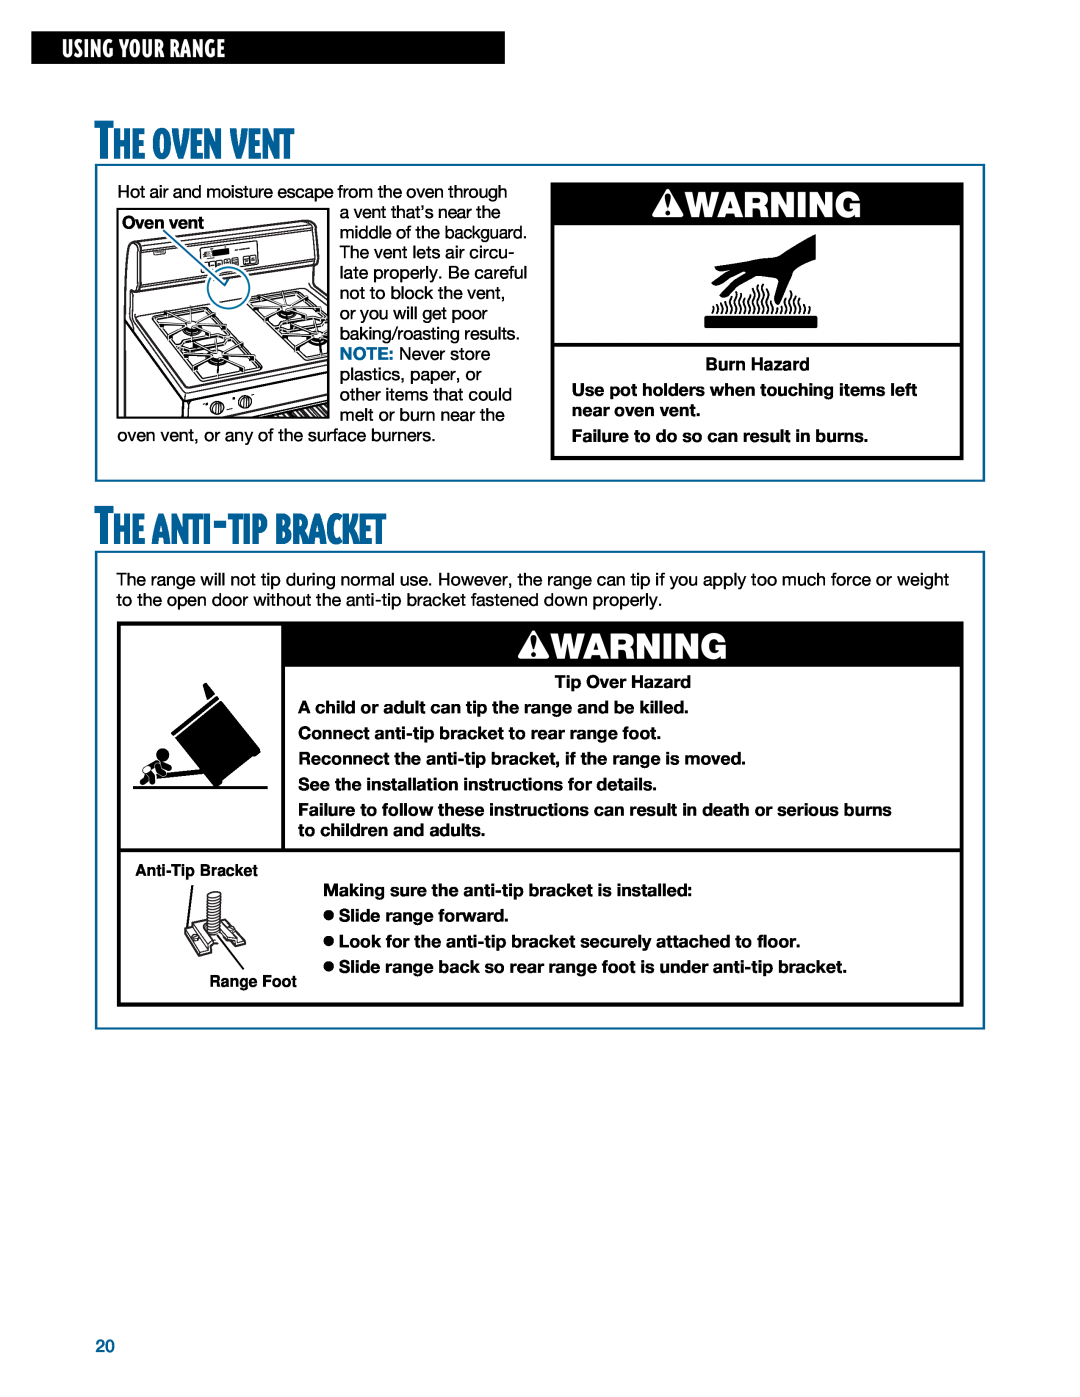 Whirlpool TGS325E manual The Anti-Tipbracket, wWARNING, The Oven Vent, Using Your Range 